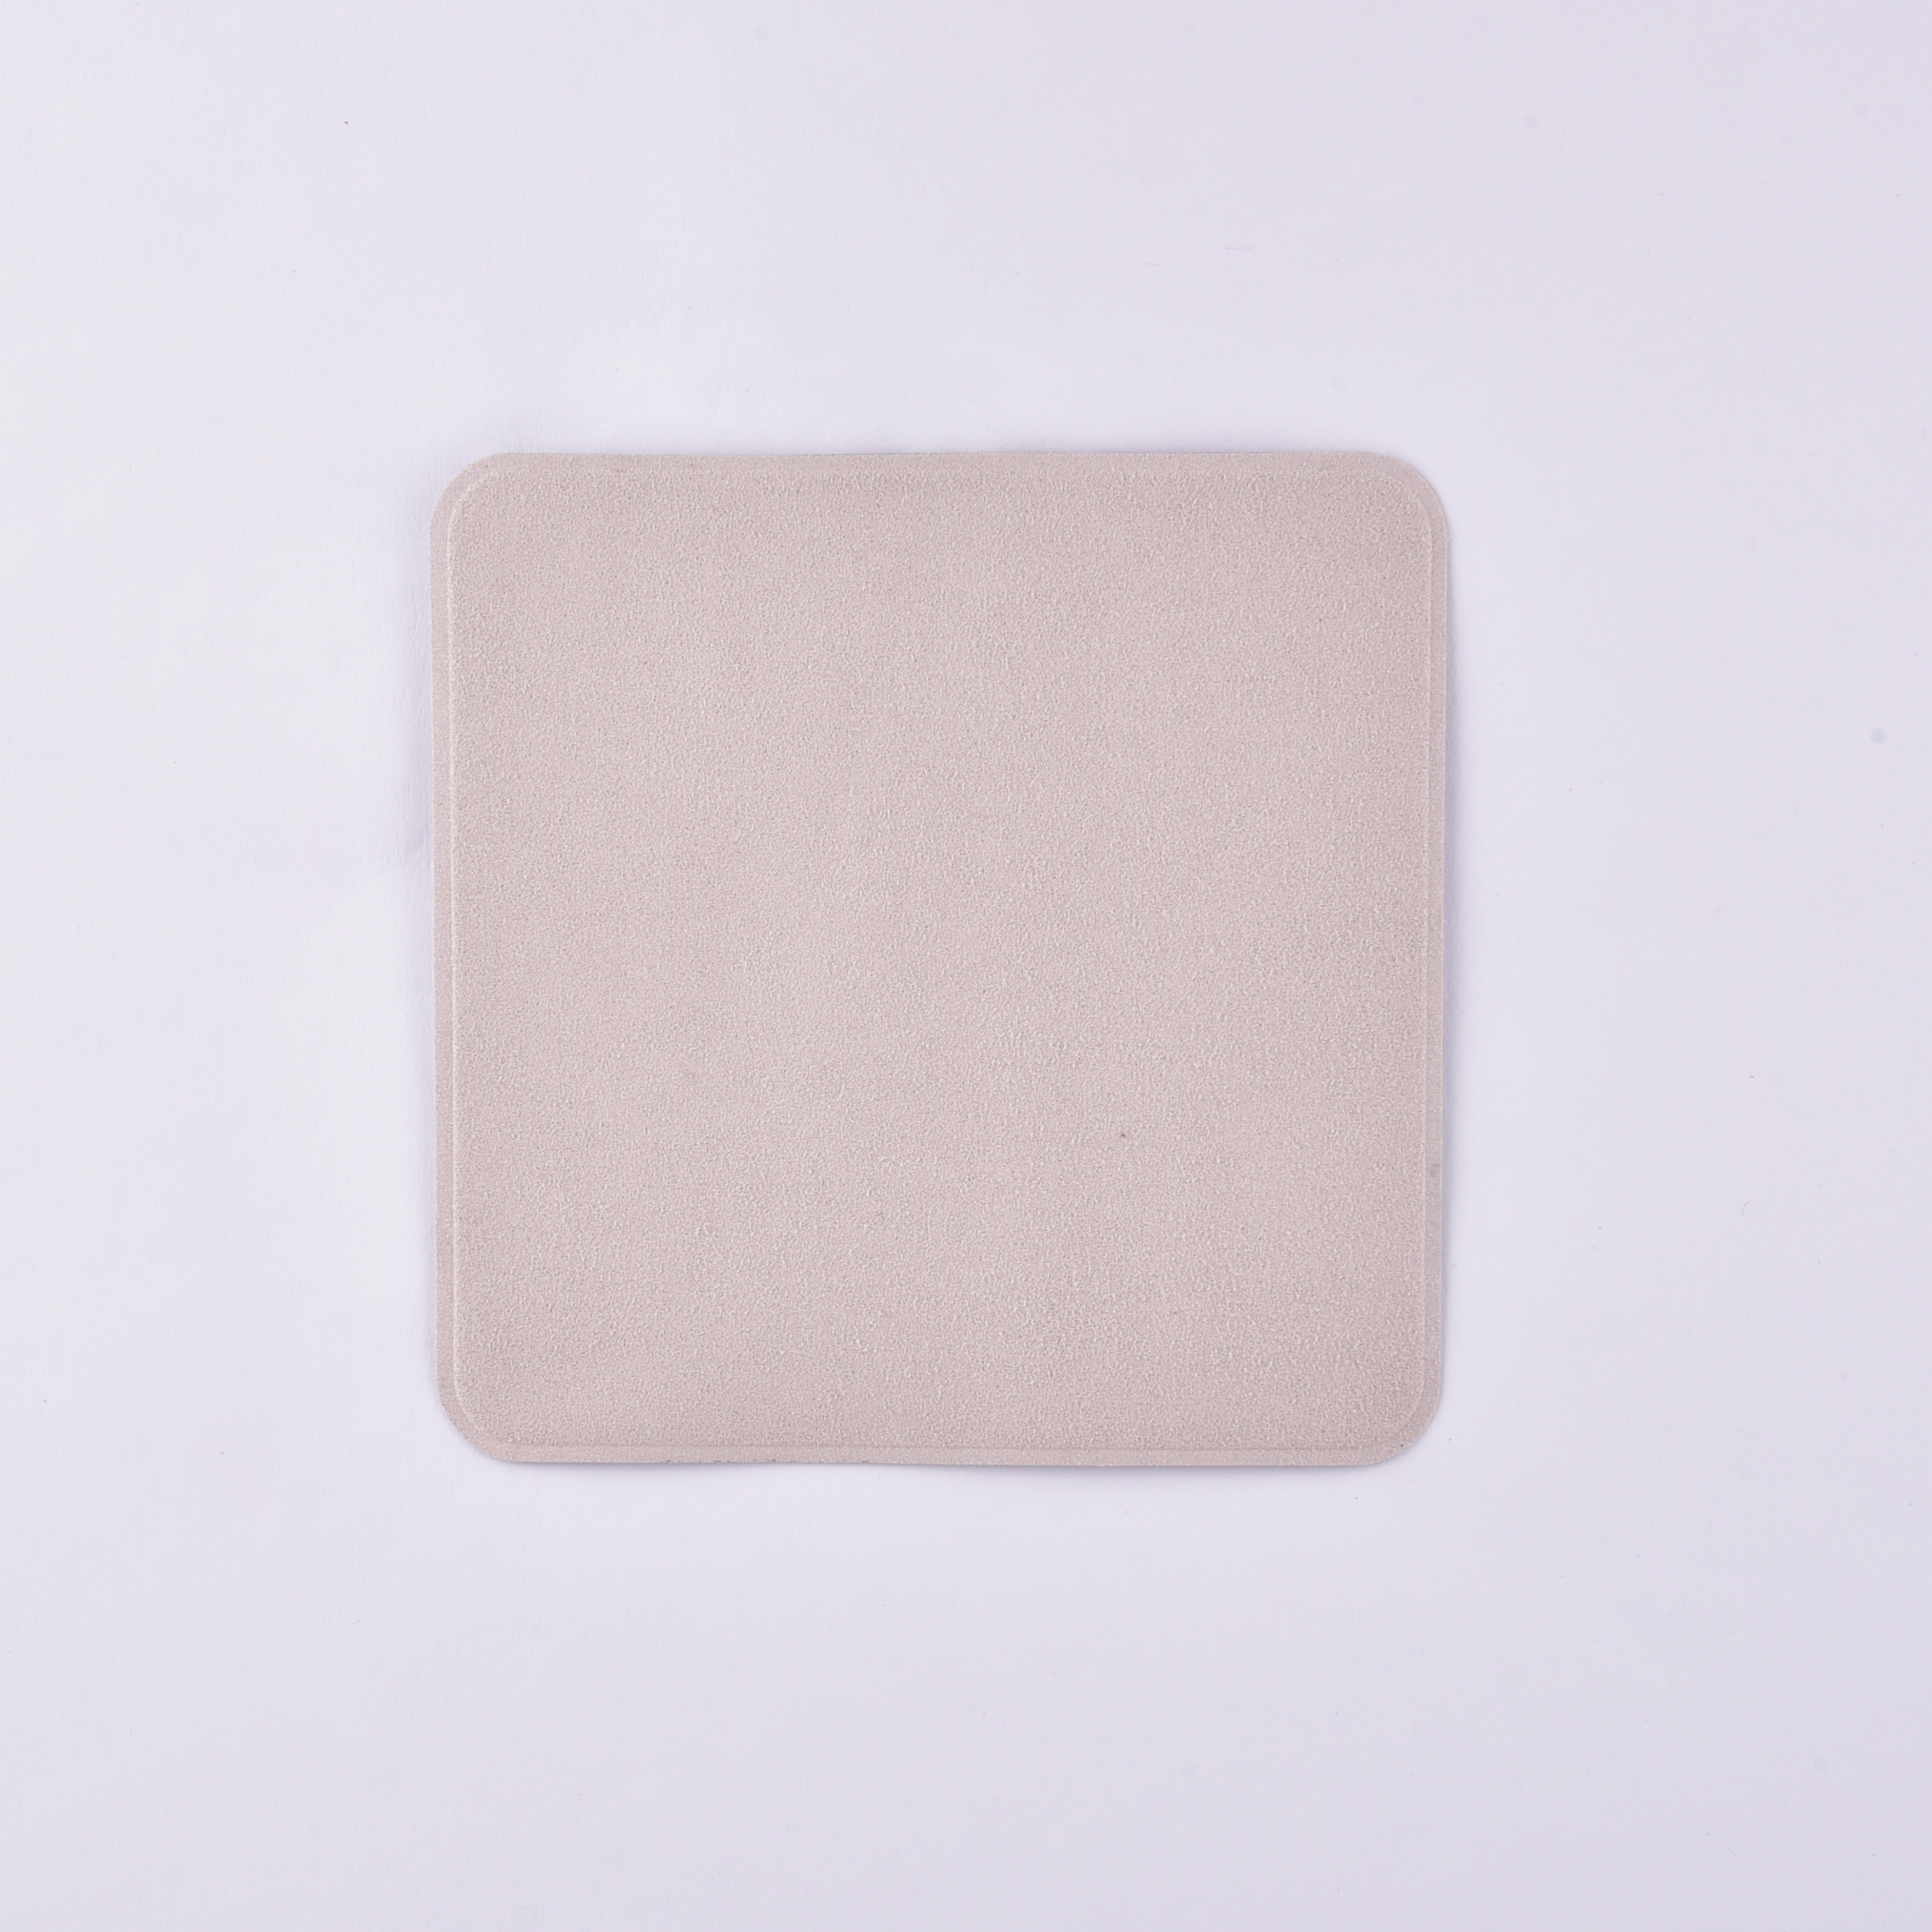 High Quality Reusable Personalized Double Sided Microfiber Glasses Cloth